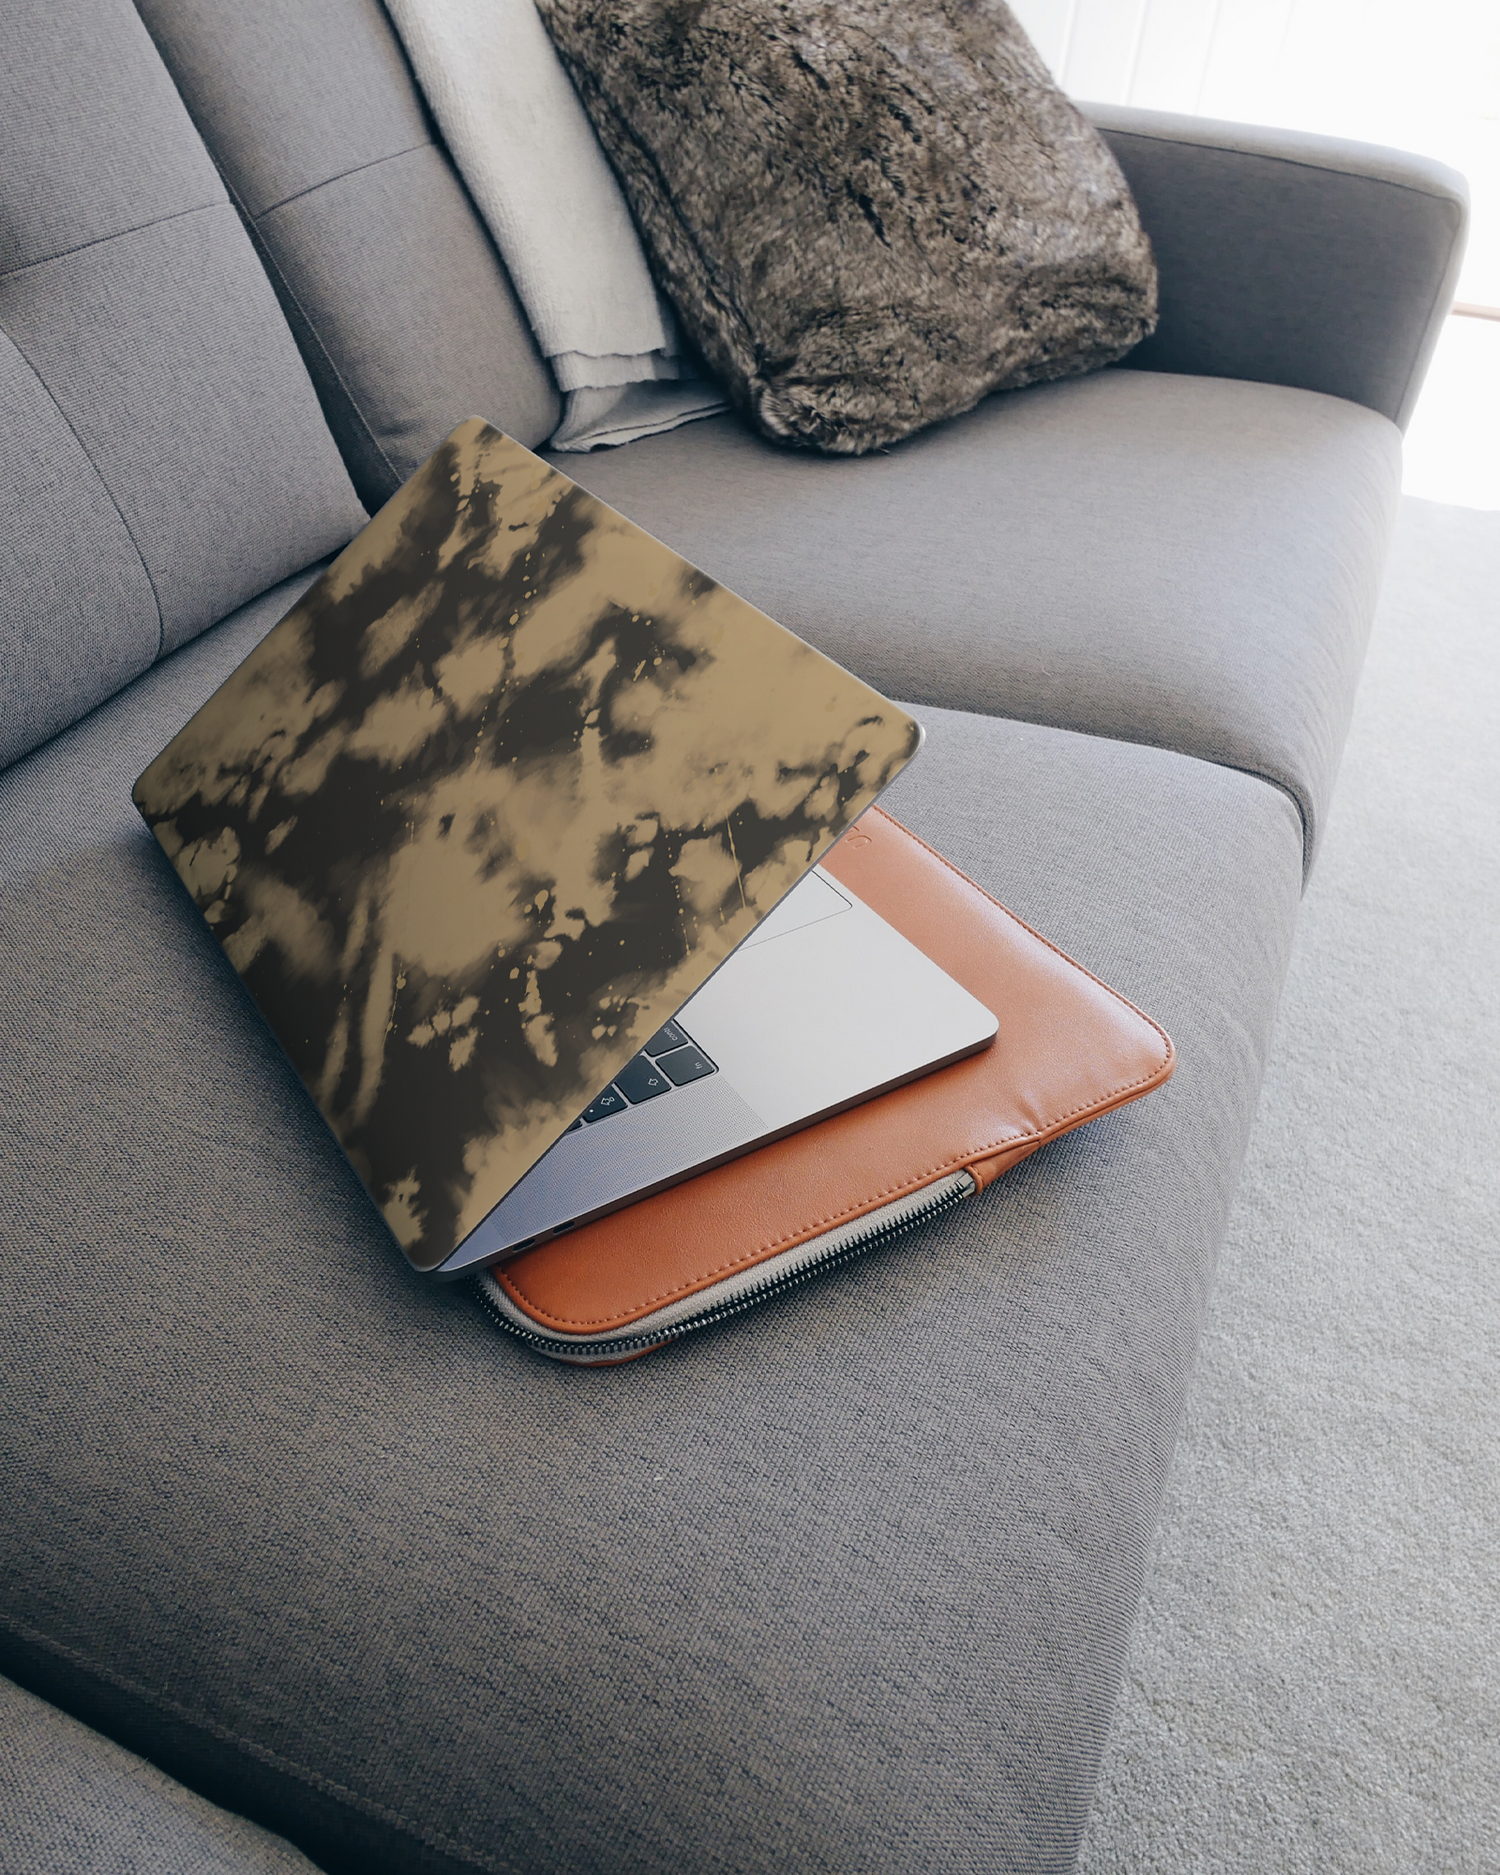 Bleached Laptop Skin for 15 inch Apple MacBooks on a couch